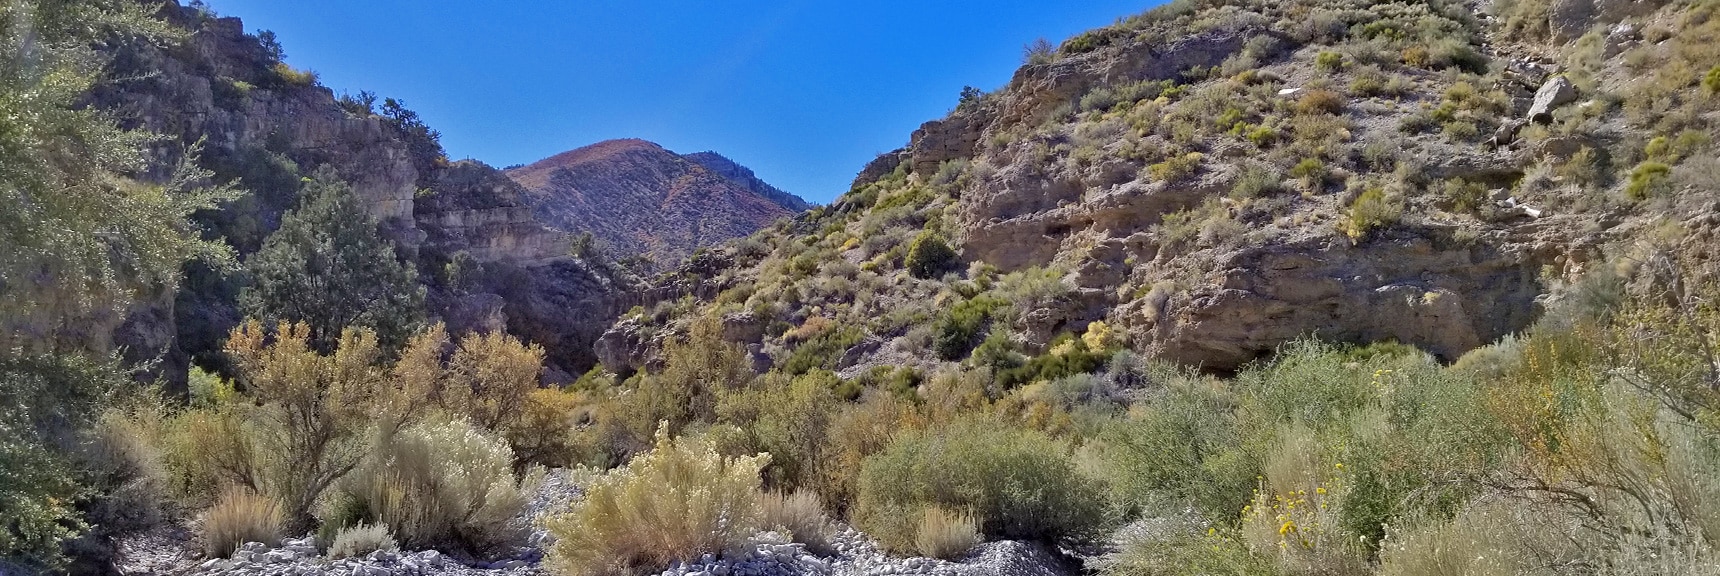 View toward Harris Mountain, Nearing the Upper Opening of the Canyon | Harris Springs Canyon | Biking from Centennial Hills | Spring Mountains, Nevada